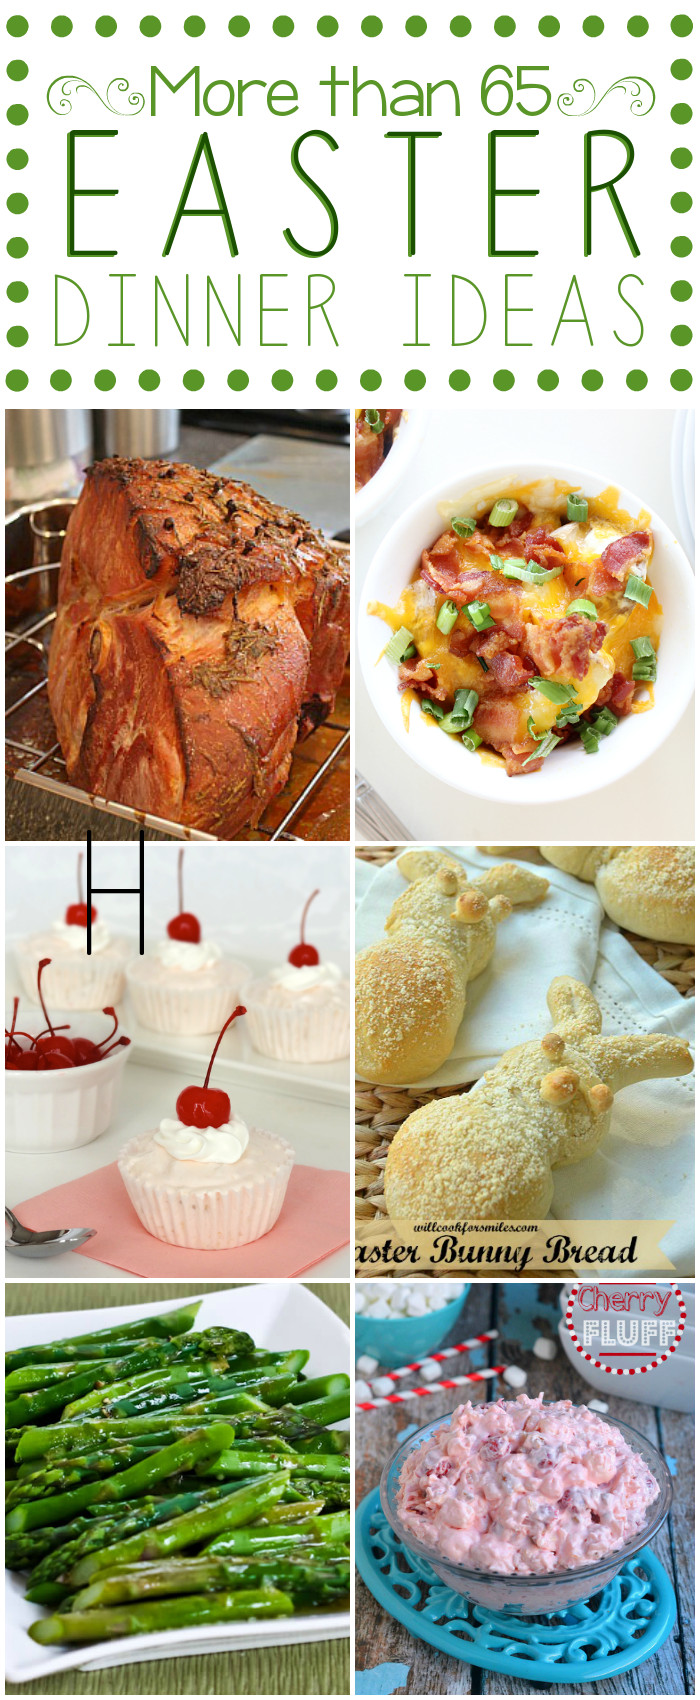 Easter Dinner Meal Ideas
 Easter Dinner Ideas Round Up Mom s Test Kitchen